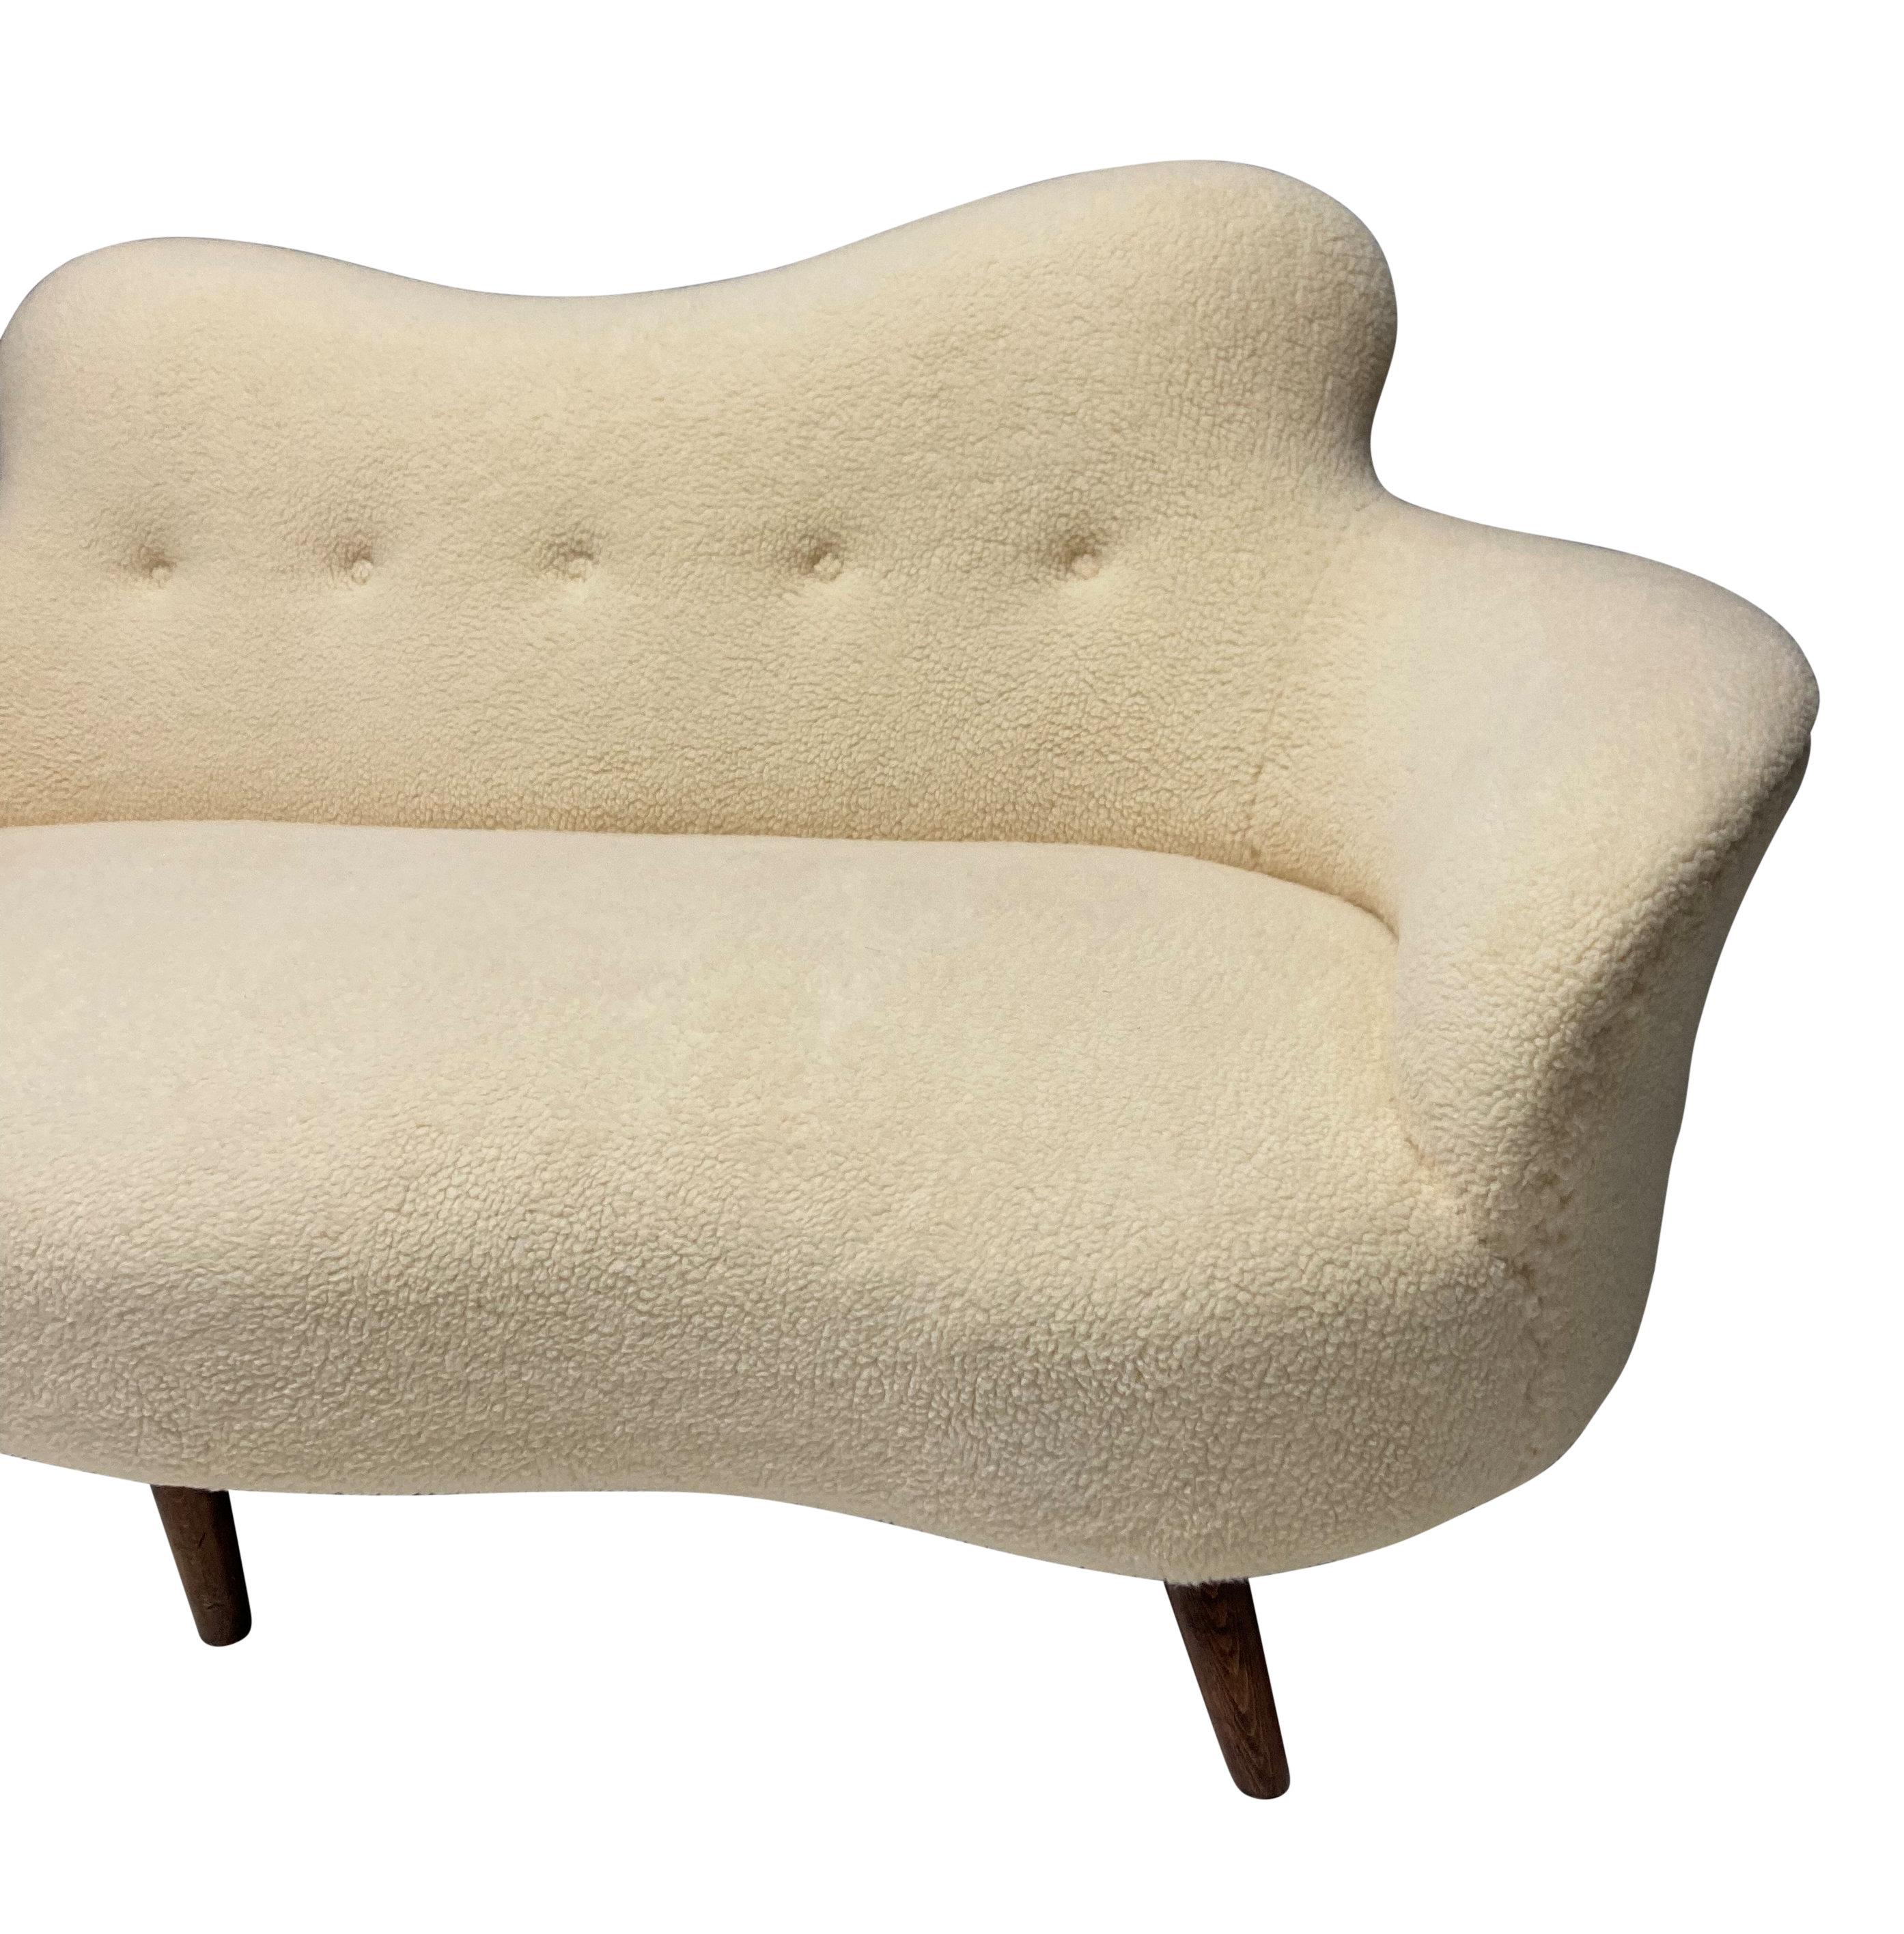 Sculptural Midcentury Italian Sofa in Faux Lambswool In Good Condition For Sale In London, GB